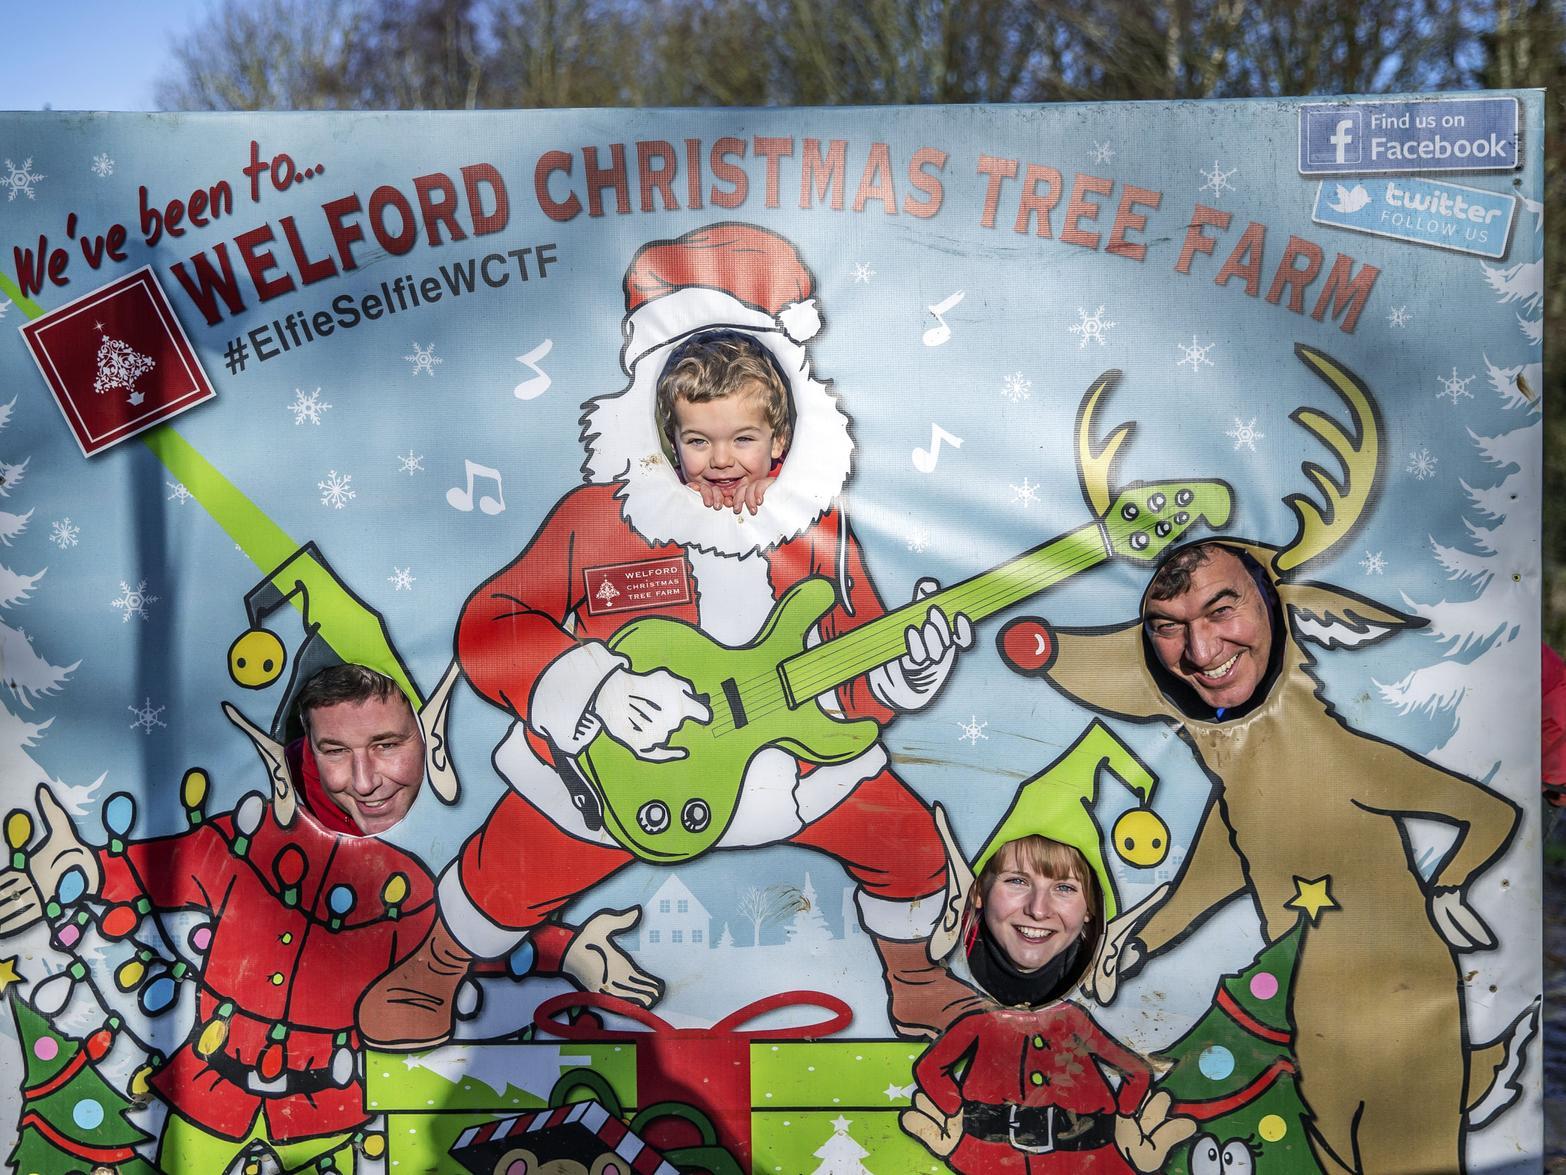 Welford Christmas Tree Farm. Pictures by Kirsty Edmonds.